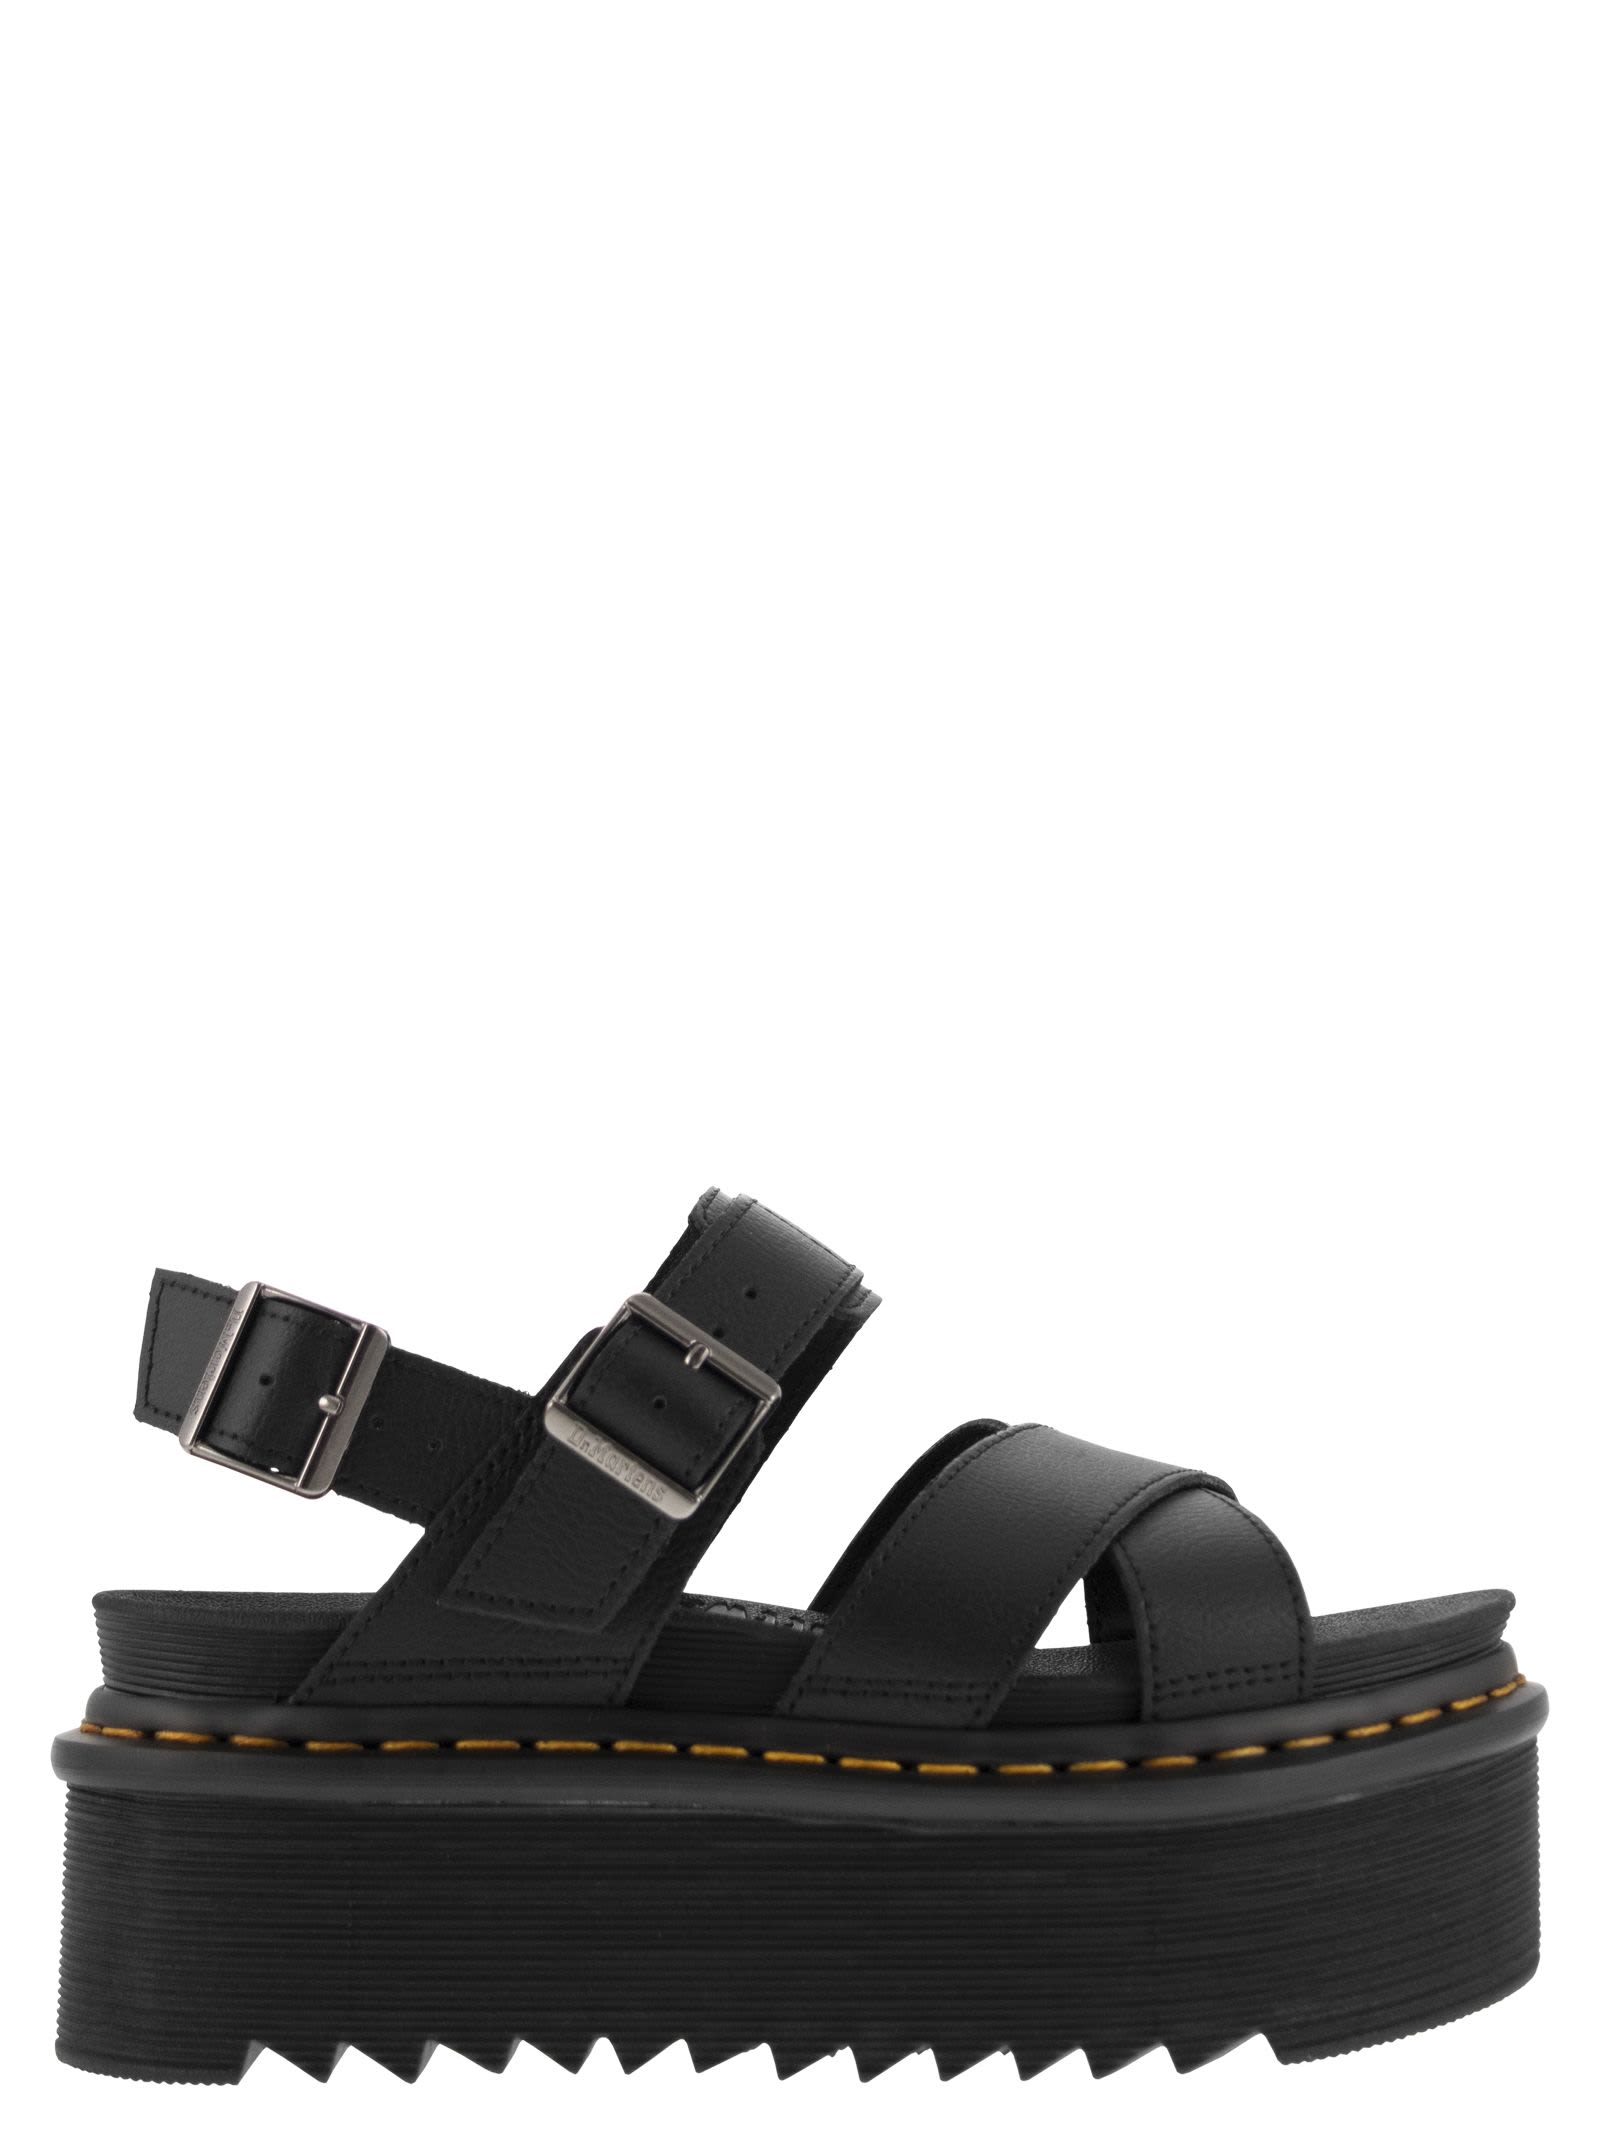 Dr. Martens Voss Ii Leather Sandals With Straps